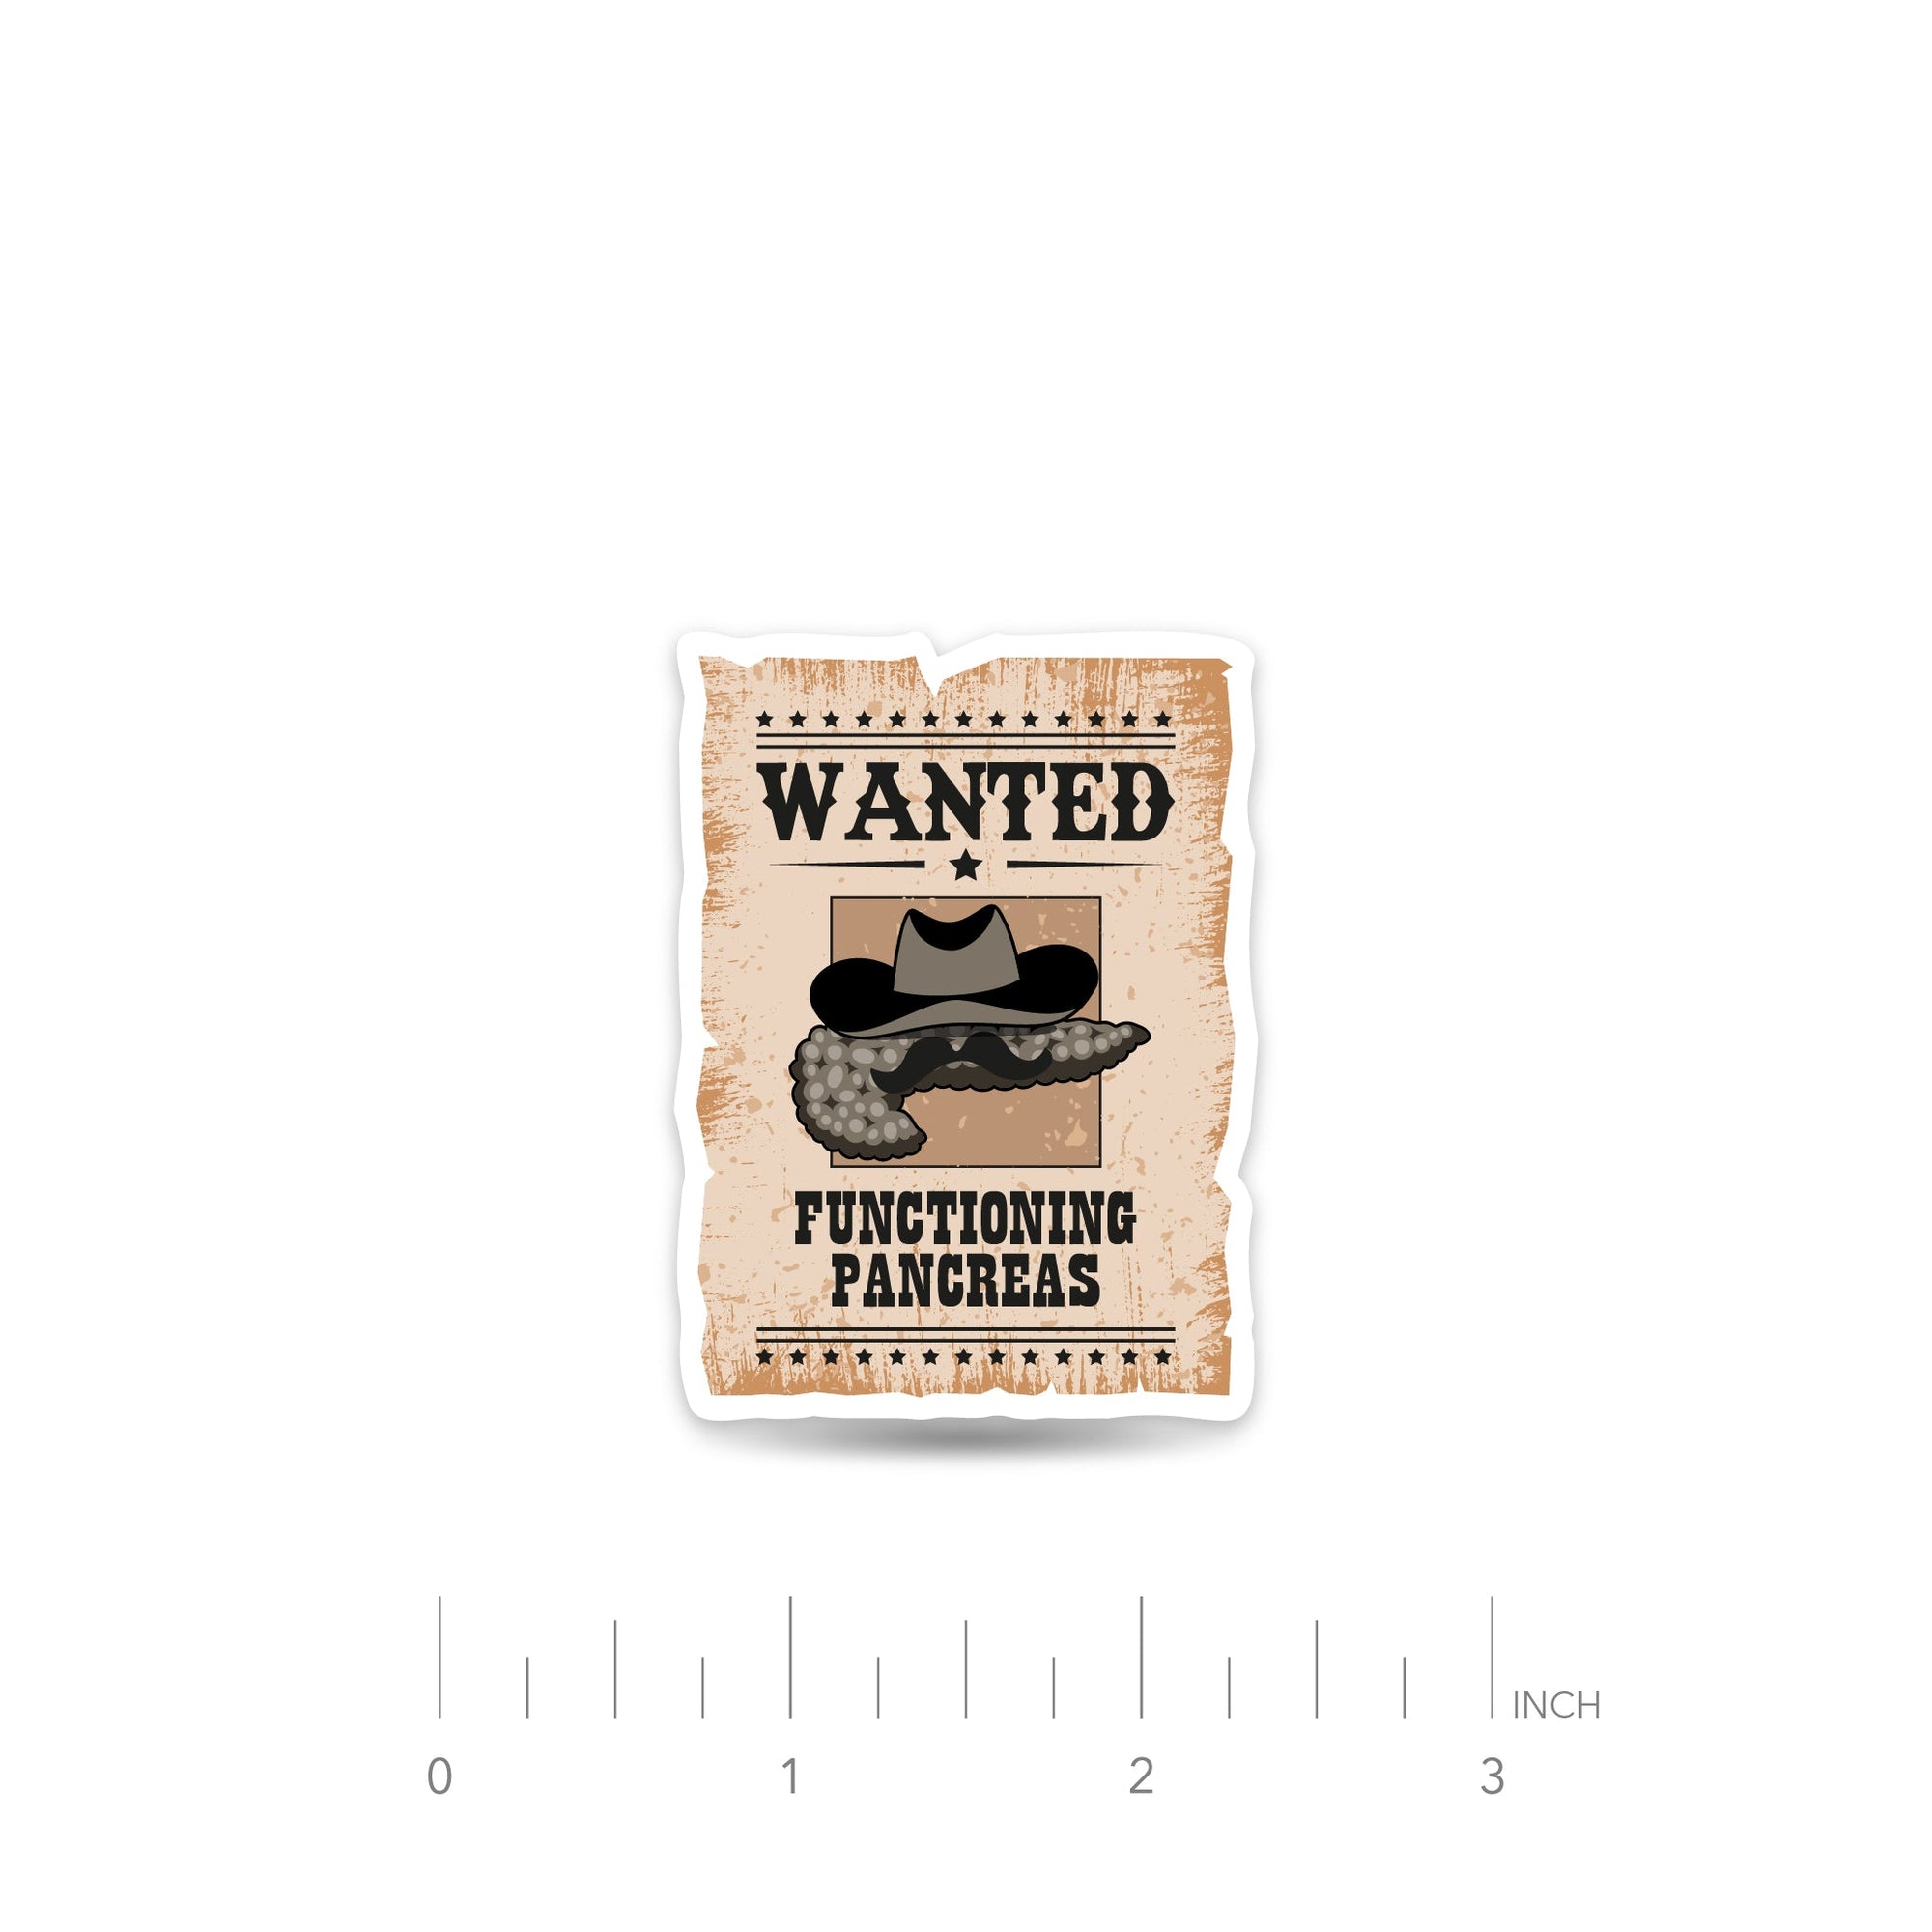 ExpressionMed Wanted Poster in Antique Brown Decal Sticker, Single Sticker, Pancreas Diabetes Themed Fun Sticker, Continuous Gluclose Monitor Tandem T-Slim Device Cover